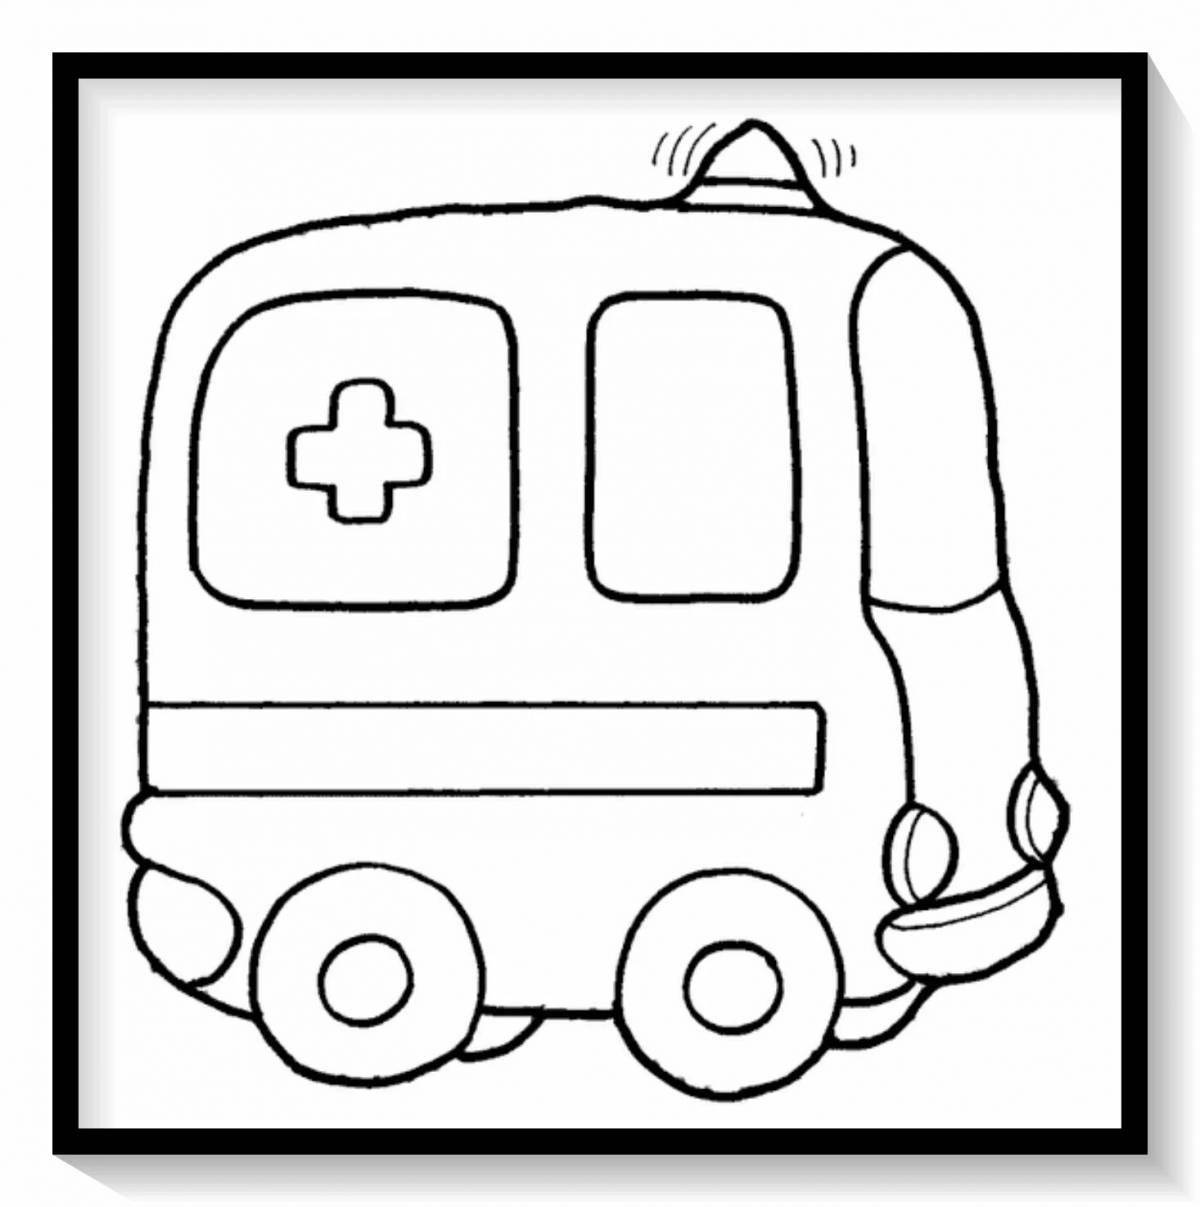 Adorable car coloring book for 3 year olds